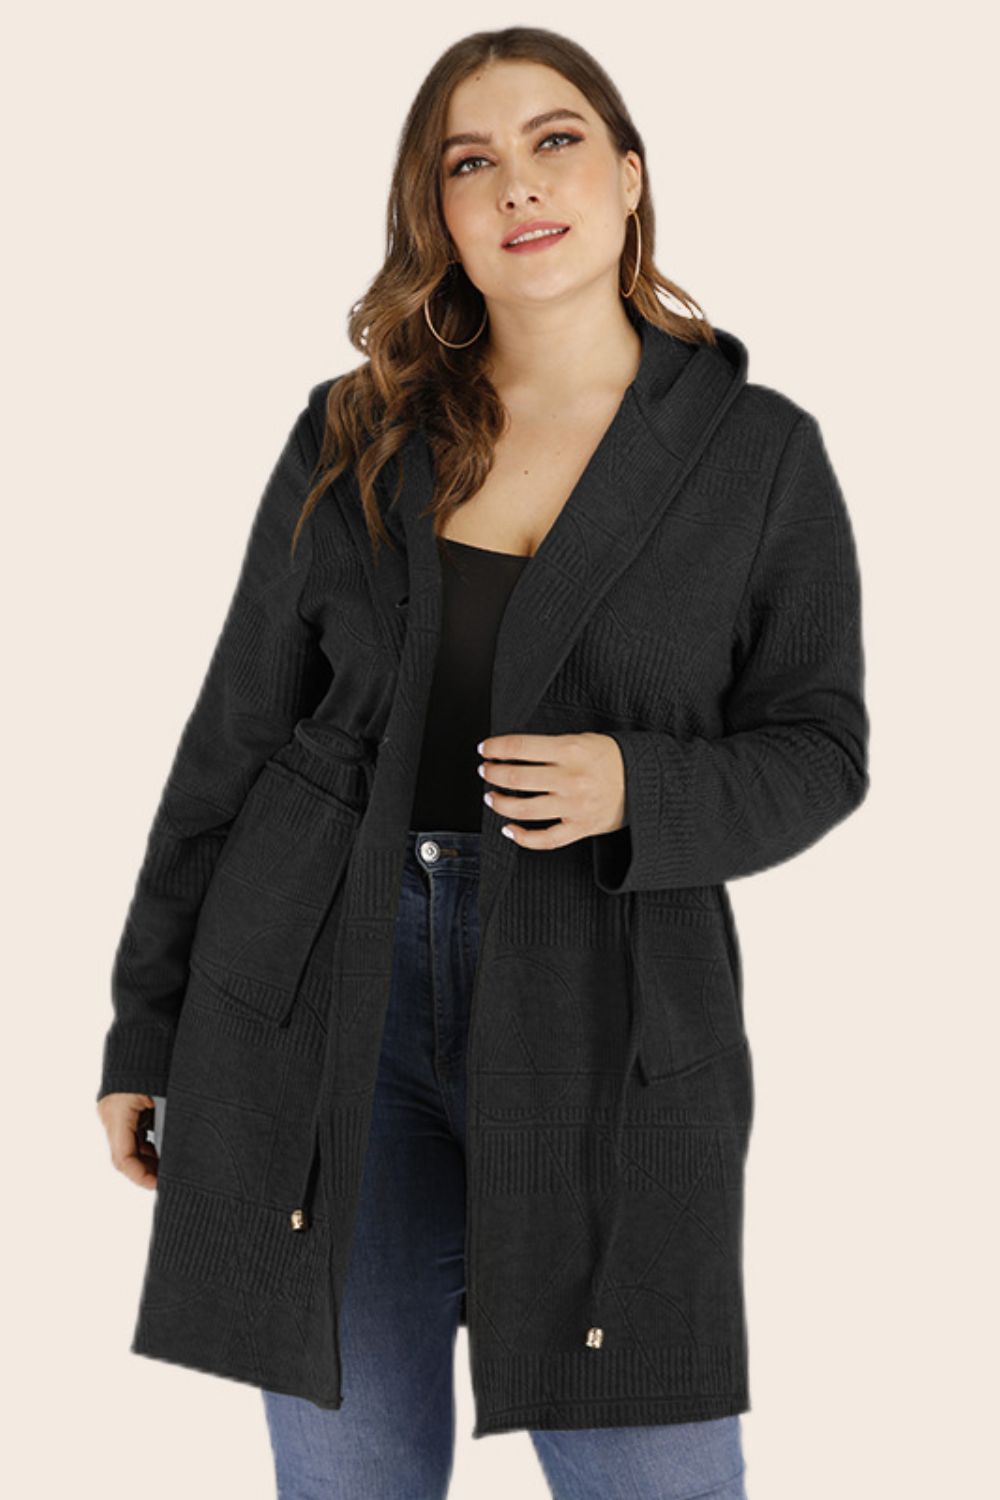 Plus Size Drawstring Waist Hooded Cardigan with Pockets COCO CRESS